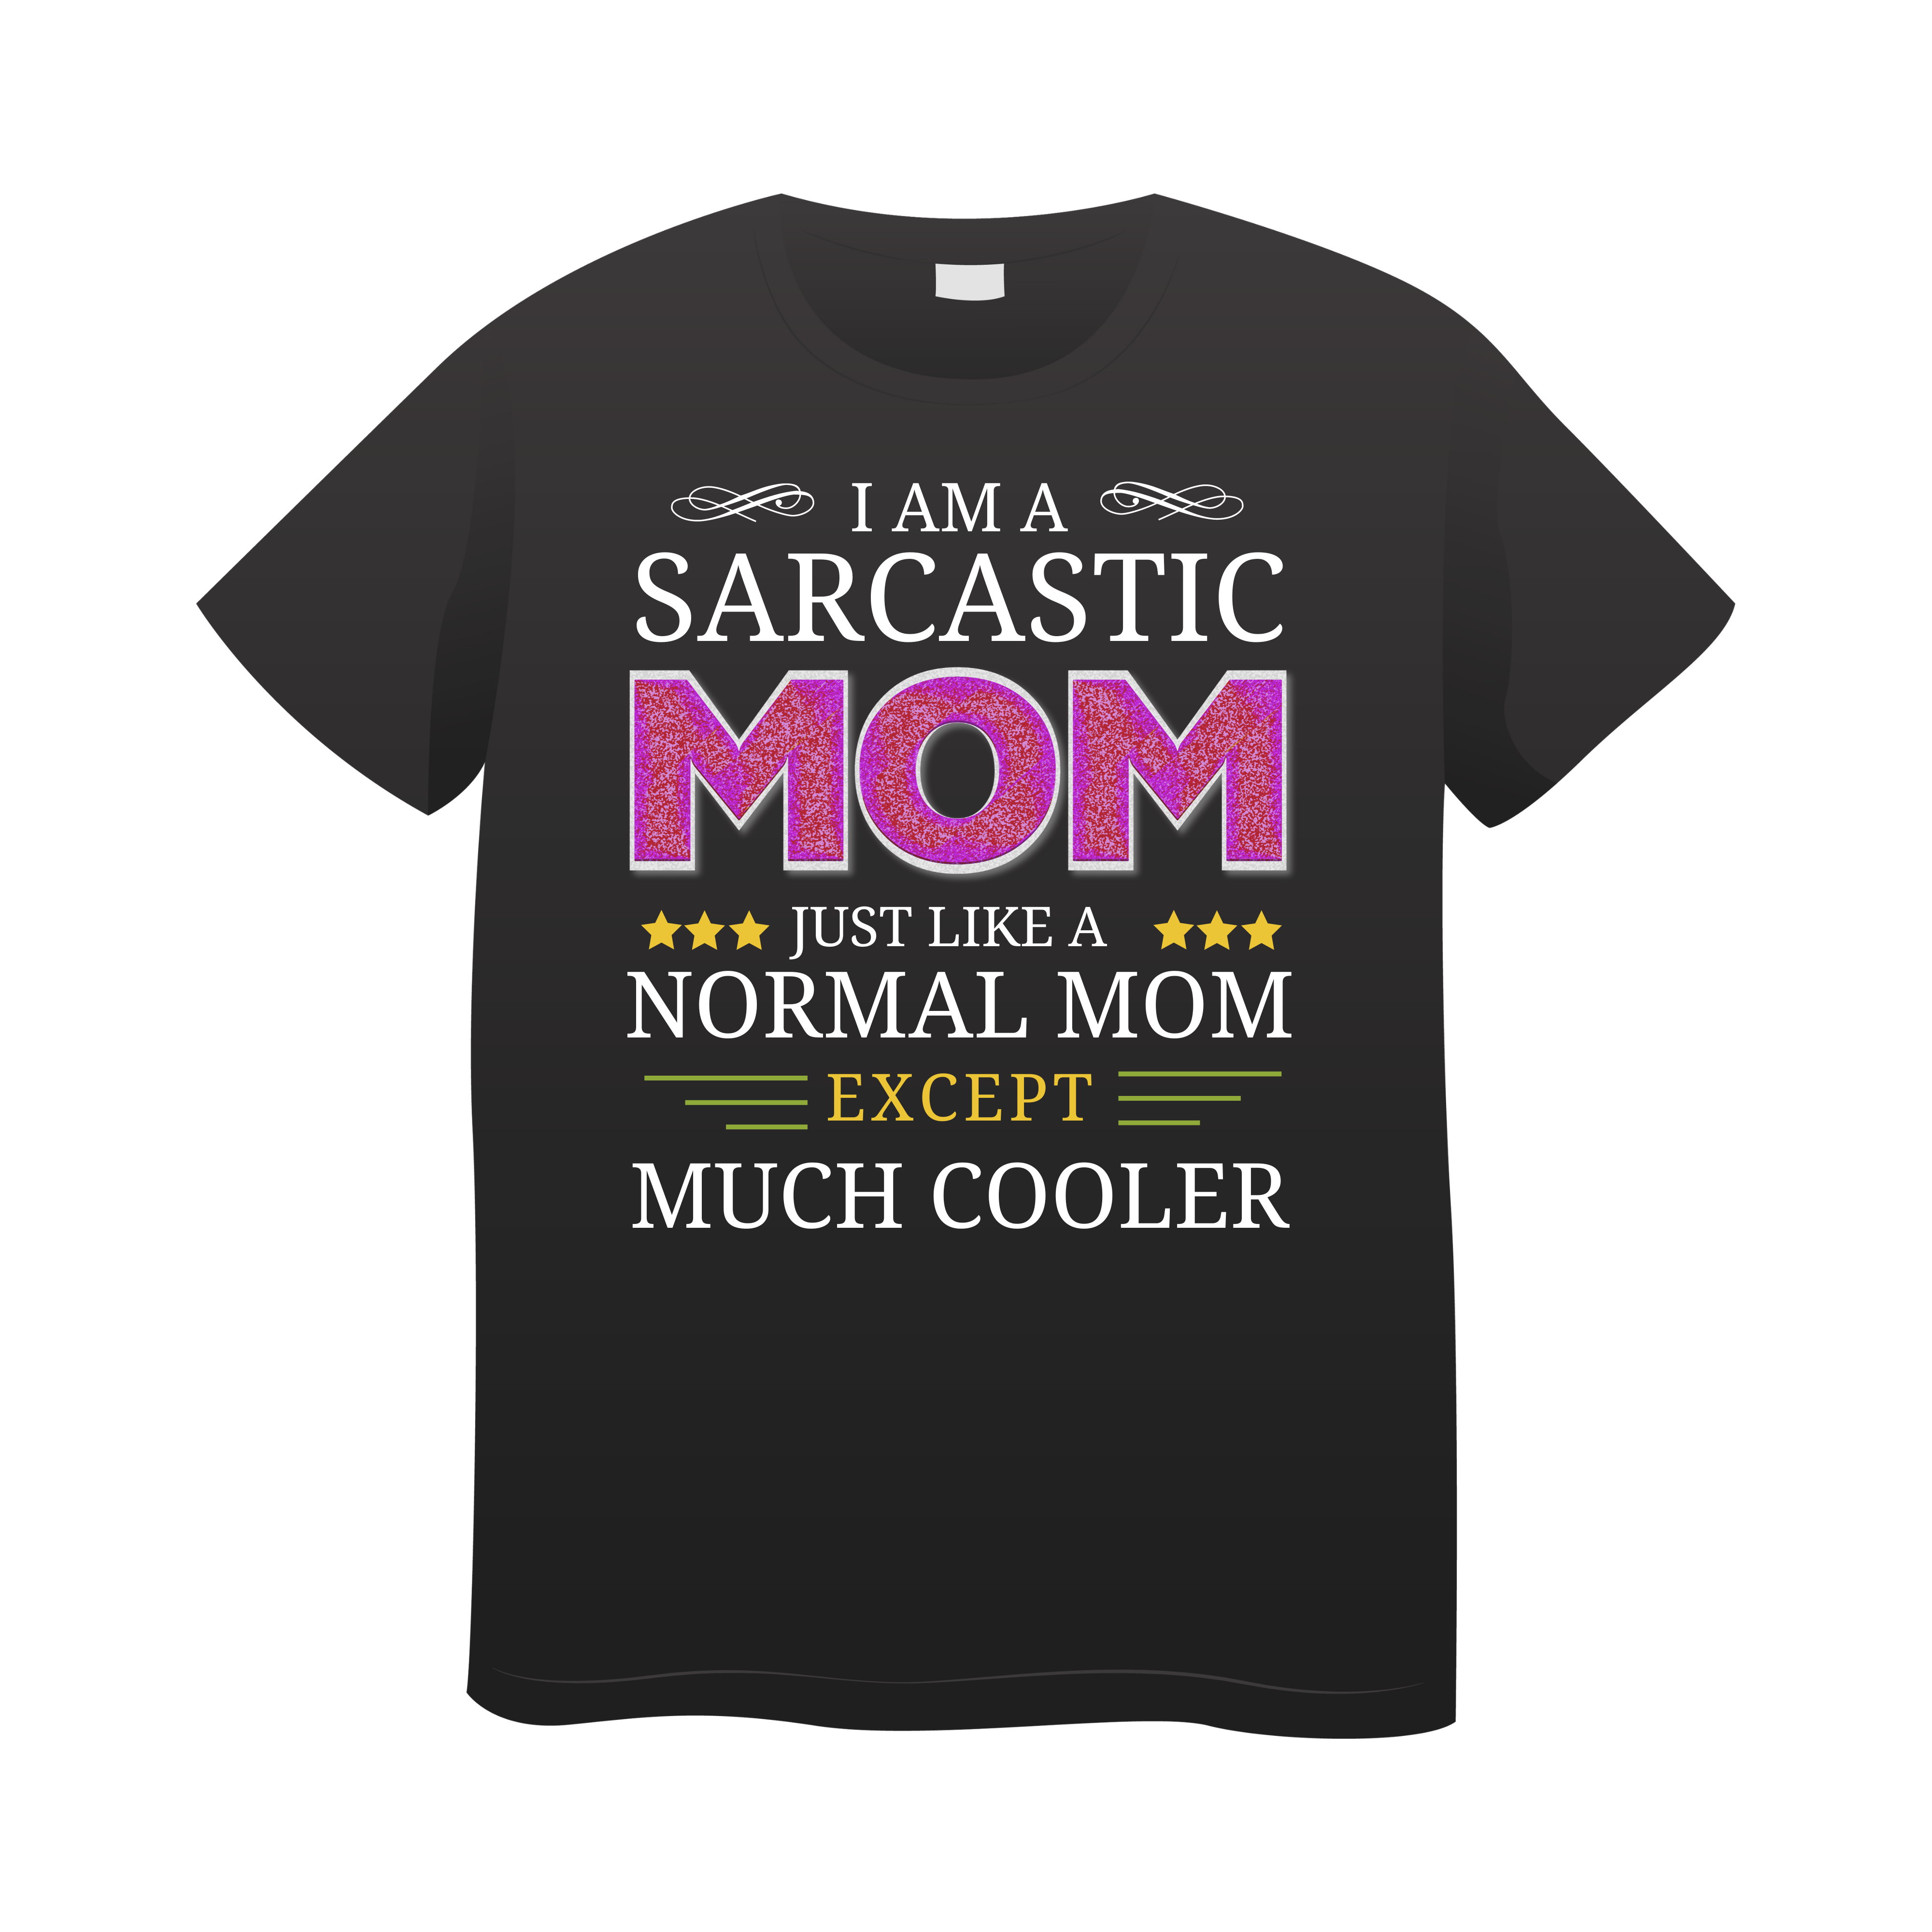 I am a sarcastic mom, just like a normal mom except much cooler graphic cotton unisex tshirt 